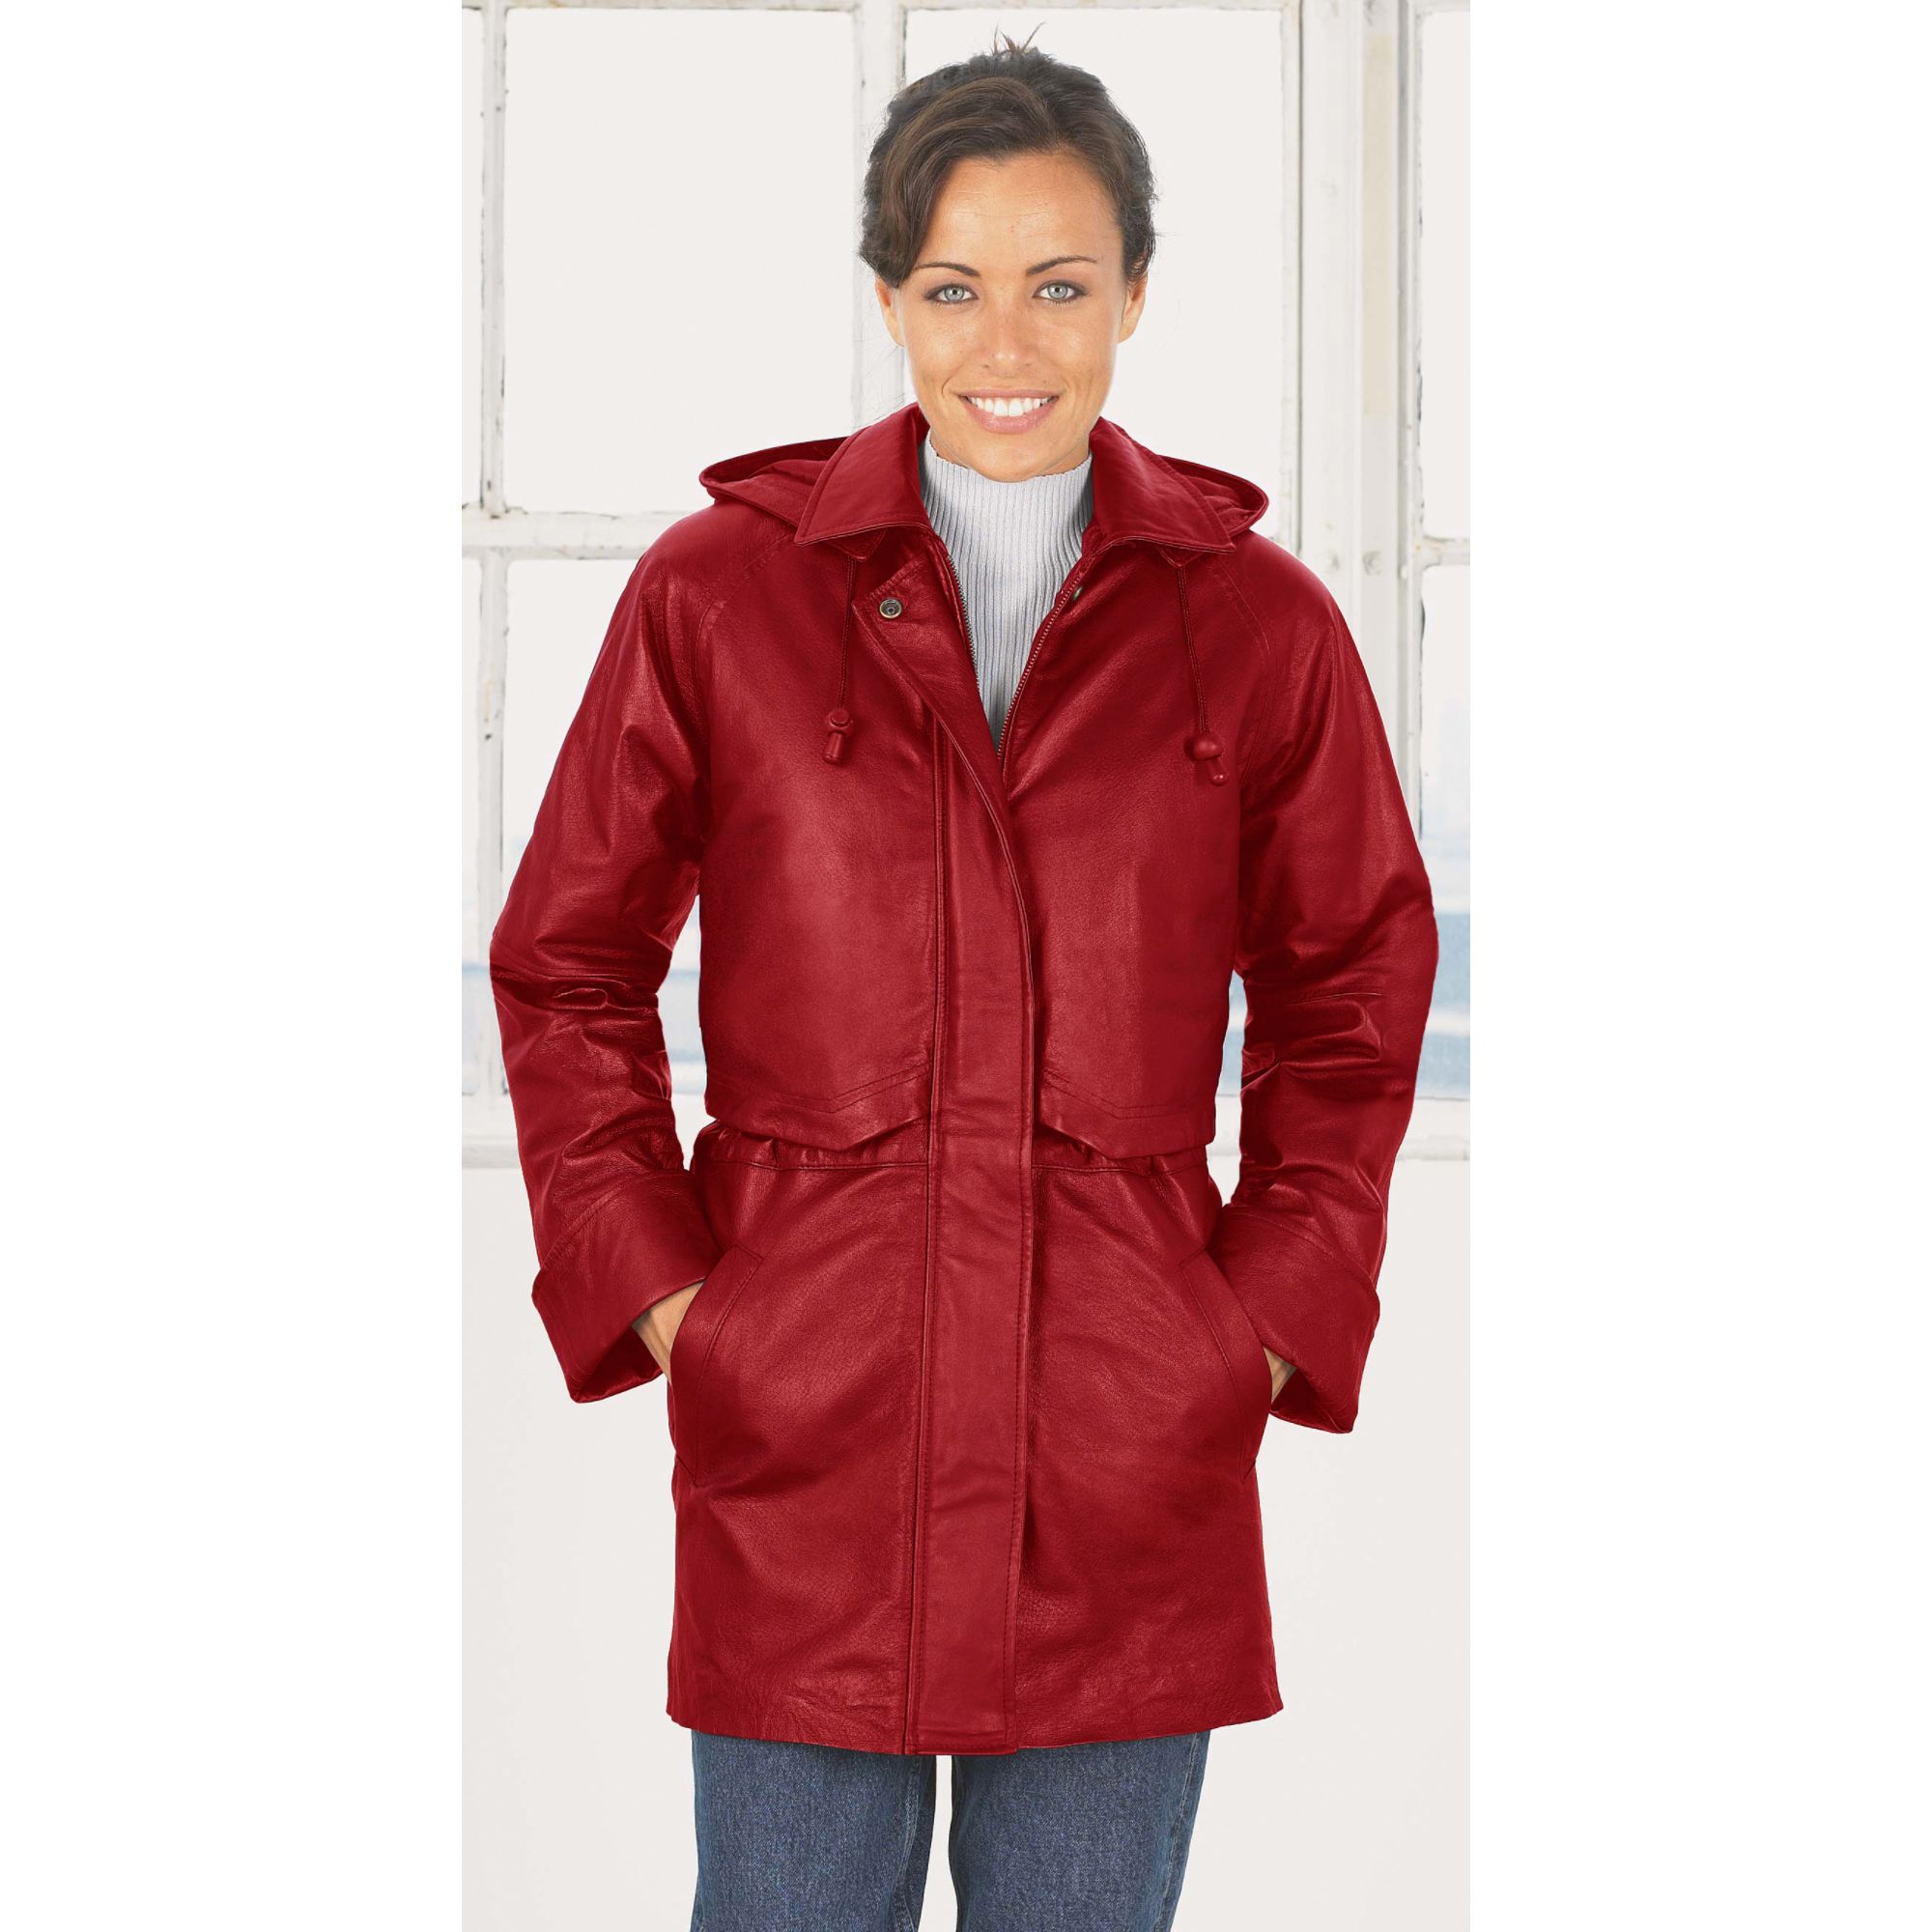 Excelled Women's Leather Anorak Jacket - Petite